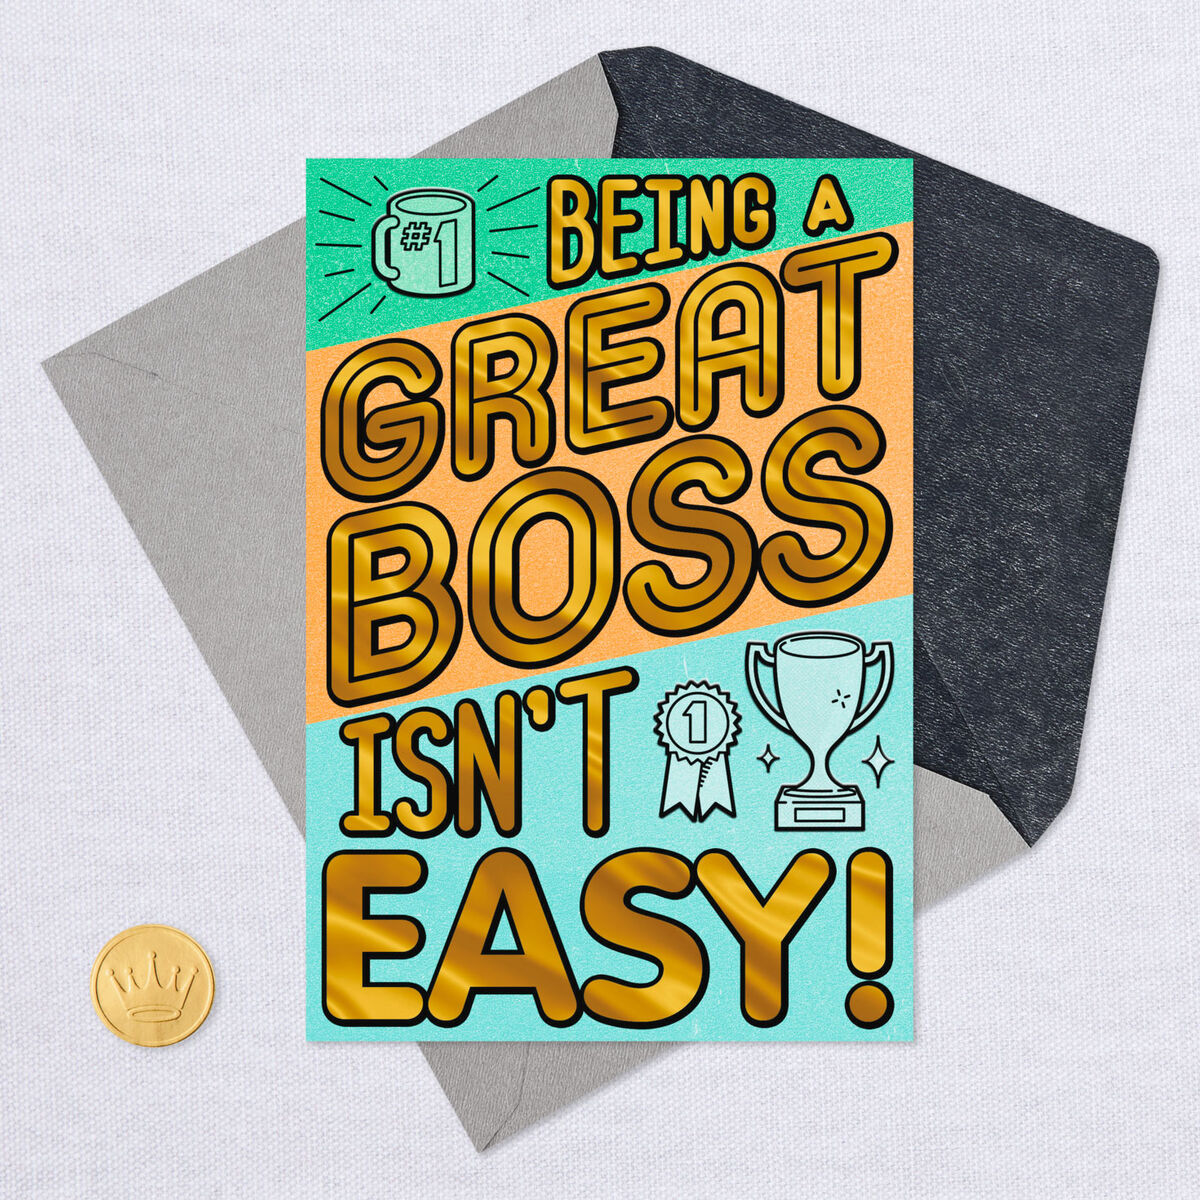 You Make It Look Easy Boss's Day Card - Greeting Cards - Hallmark